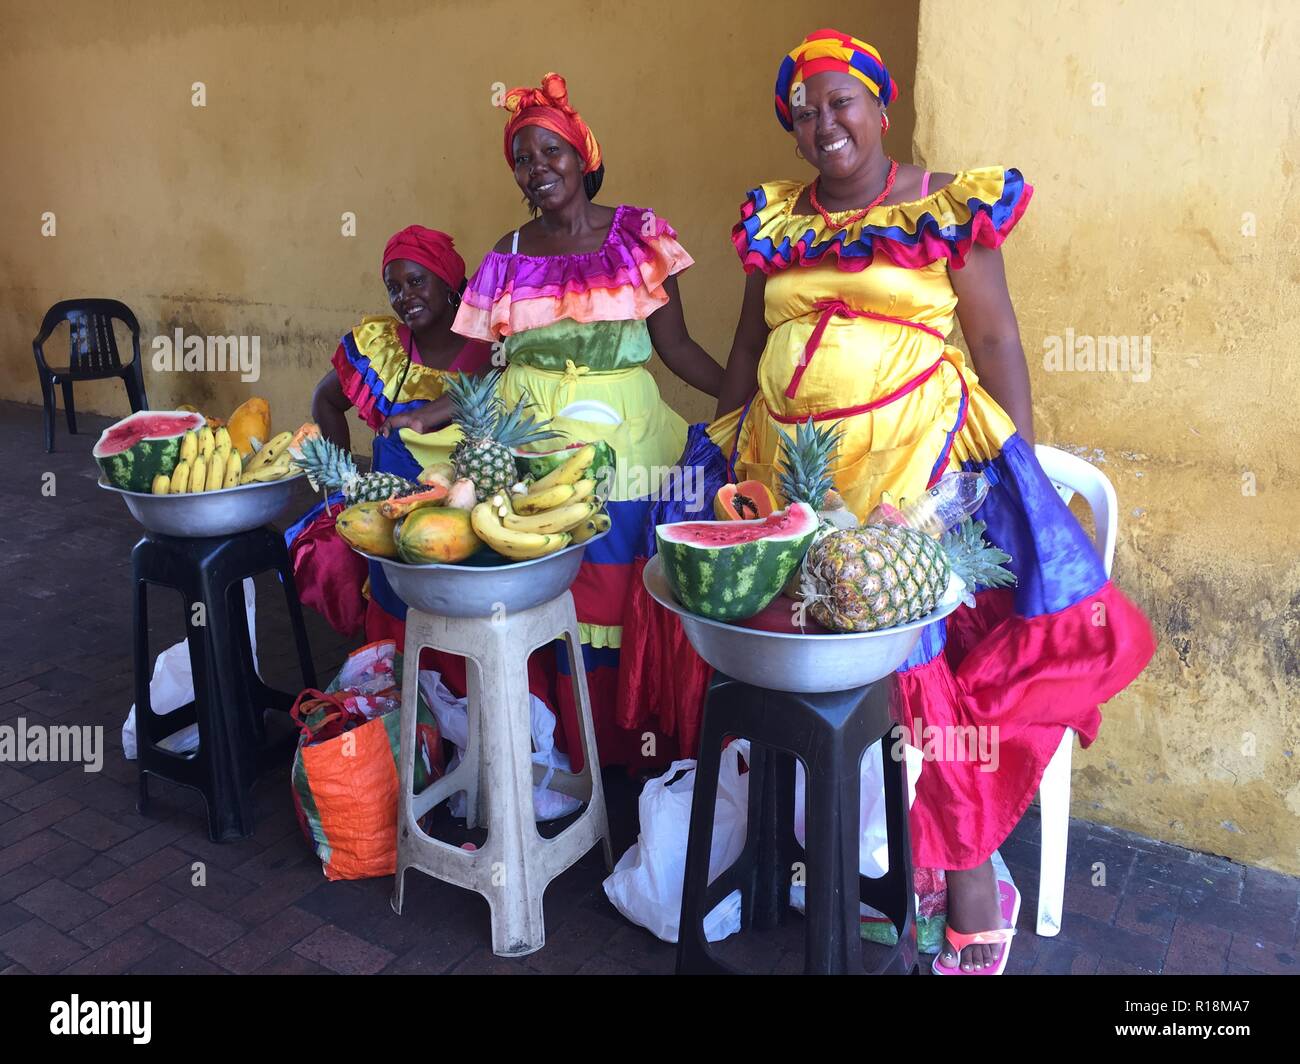 Cartagena, Colombia - march 2018:Colobian women in traditional clothes selling fruits on street in Cartagena, Colombia Stock Photo